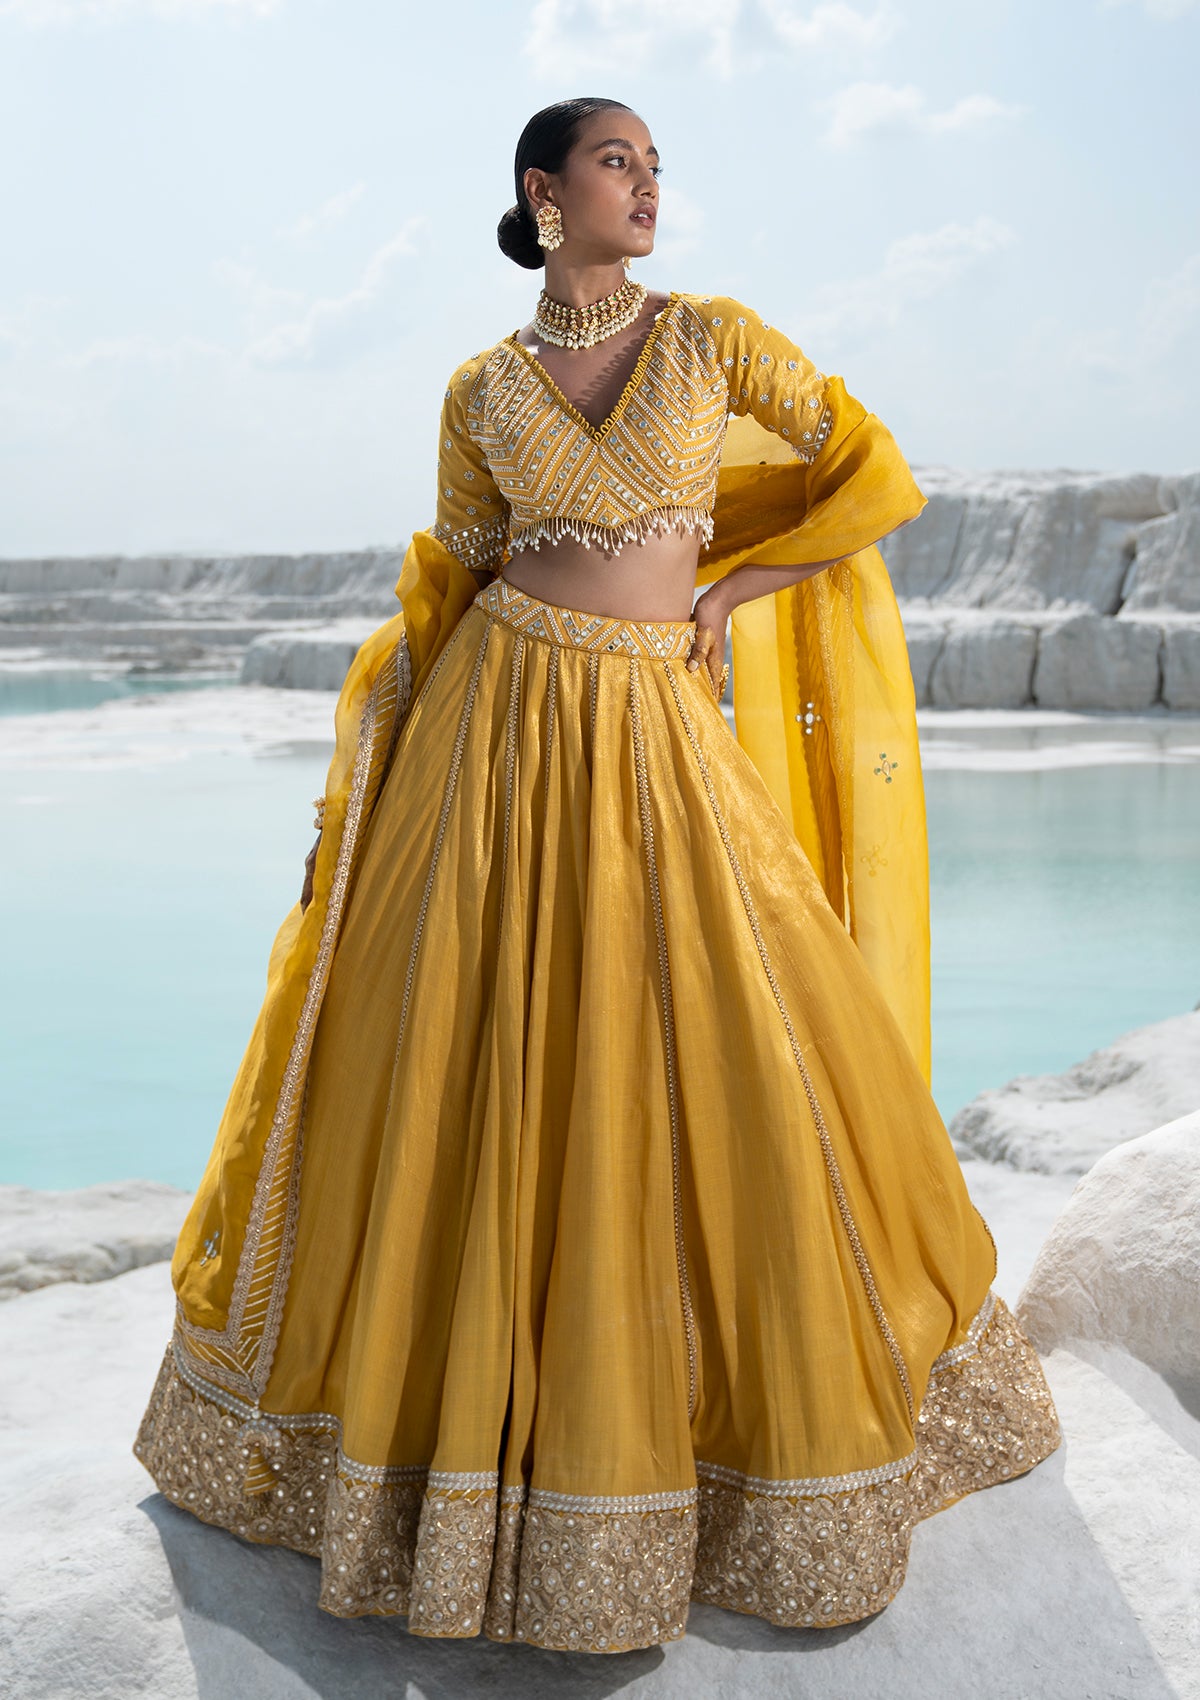 15 Brides Who Stunned In Yellow Lehengas For Their Big Day! | Summer  wedding outfits, Sabyasachi bride, Summer wedding attire